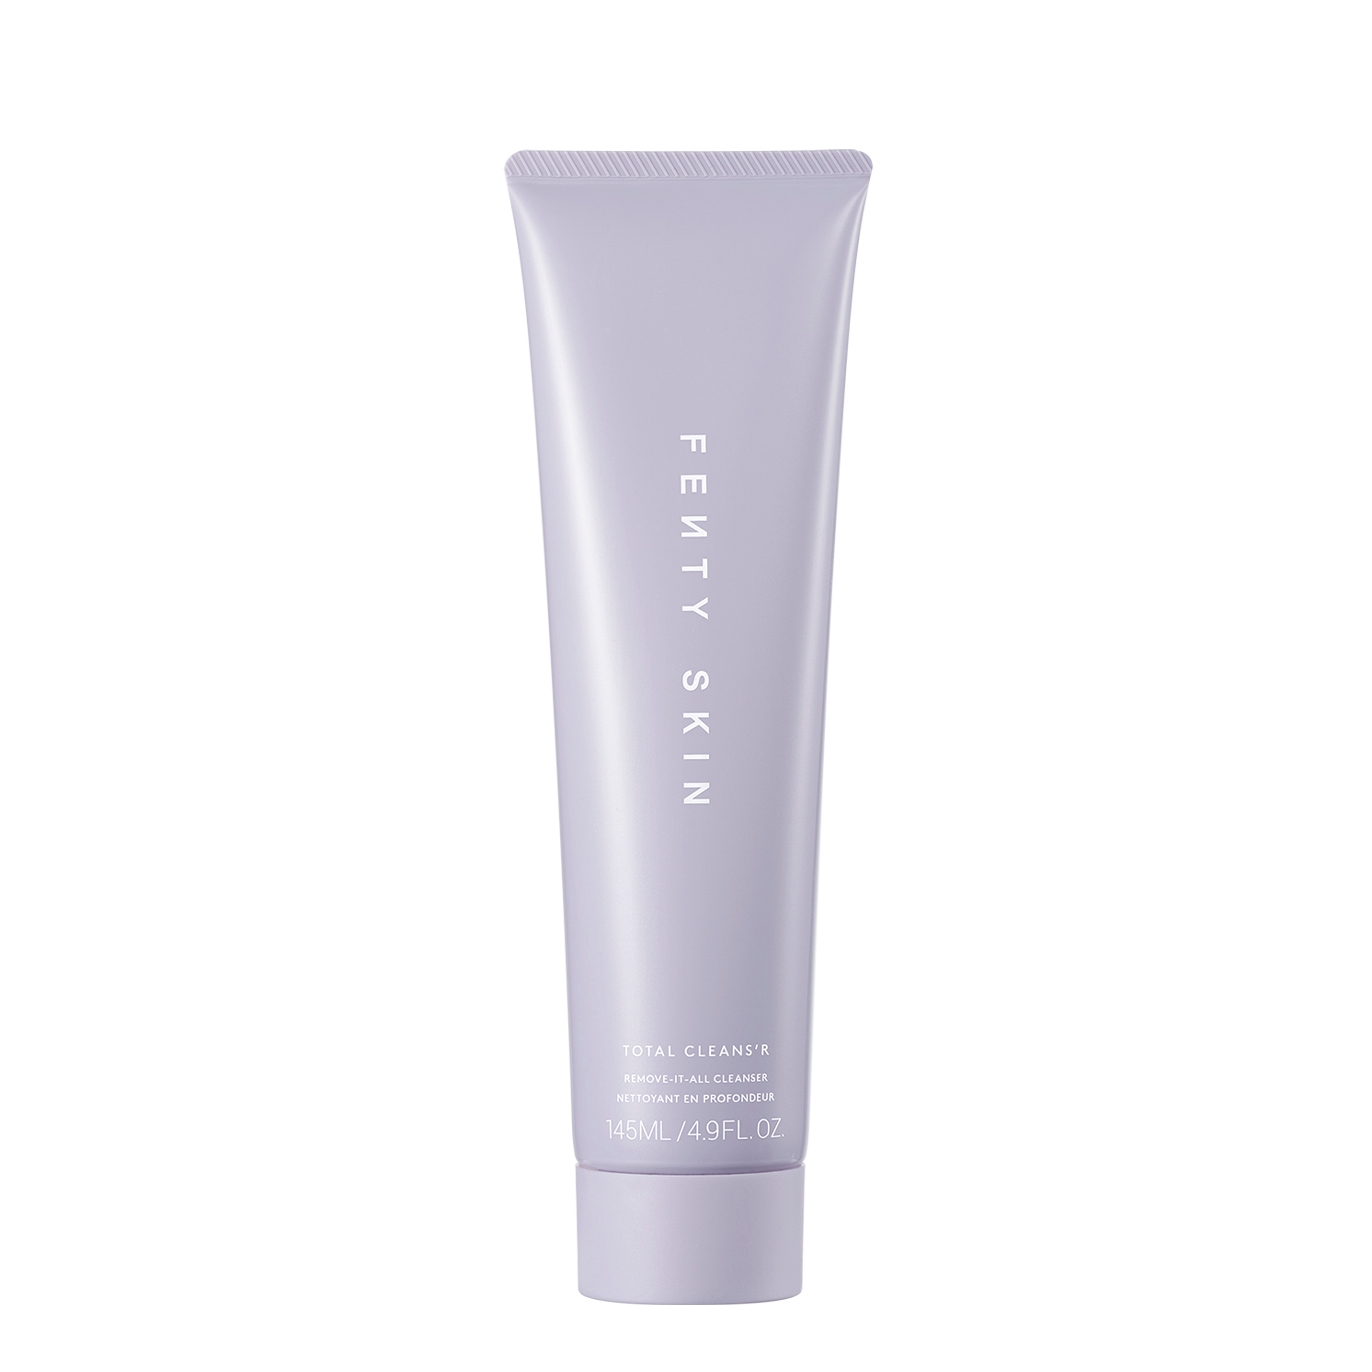 Fenty Skin Total Cleans'r Remove-It-All Cleanser